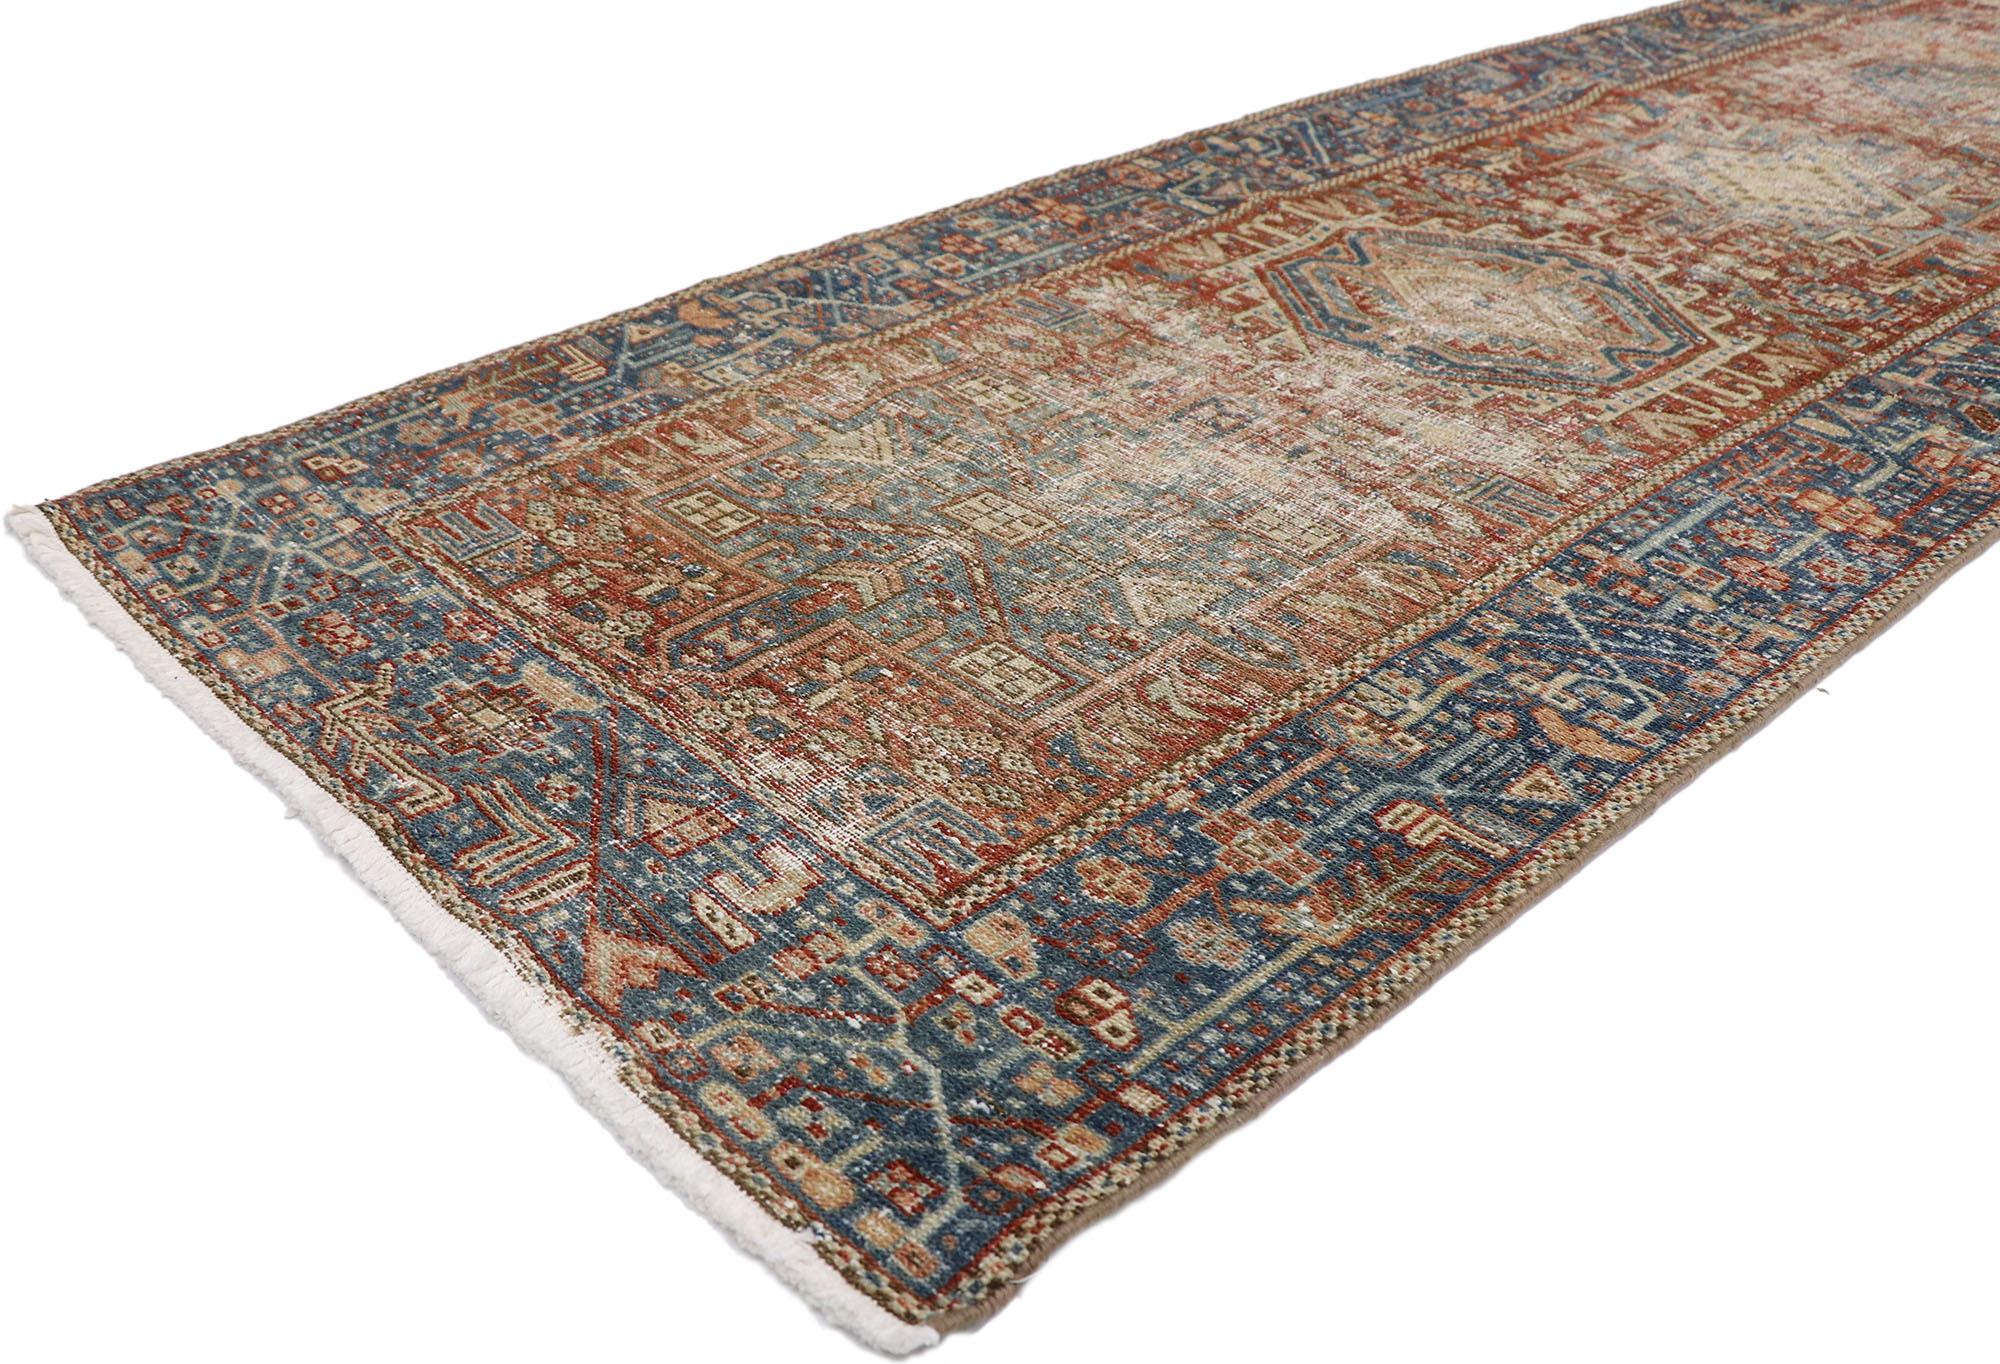 60933 distressed antique Persian Heriz Runner with Rustic tribal style 02'10 x 13'07. Cleverly composed and poised to impress with its rustic sensibility, this hand knotted wool distressed antique Persian Heriz runner will take on a curated lived-in